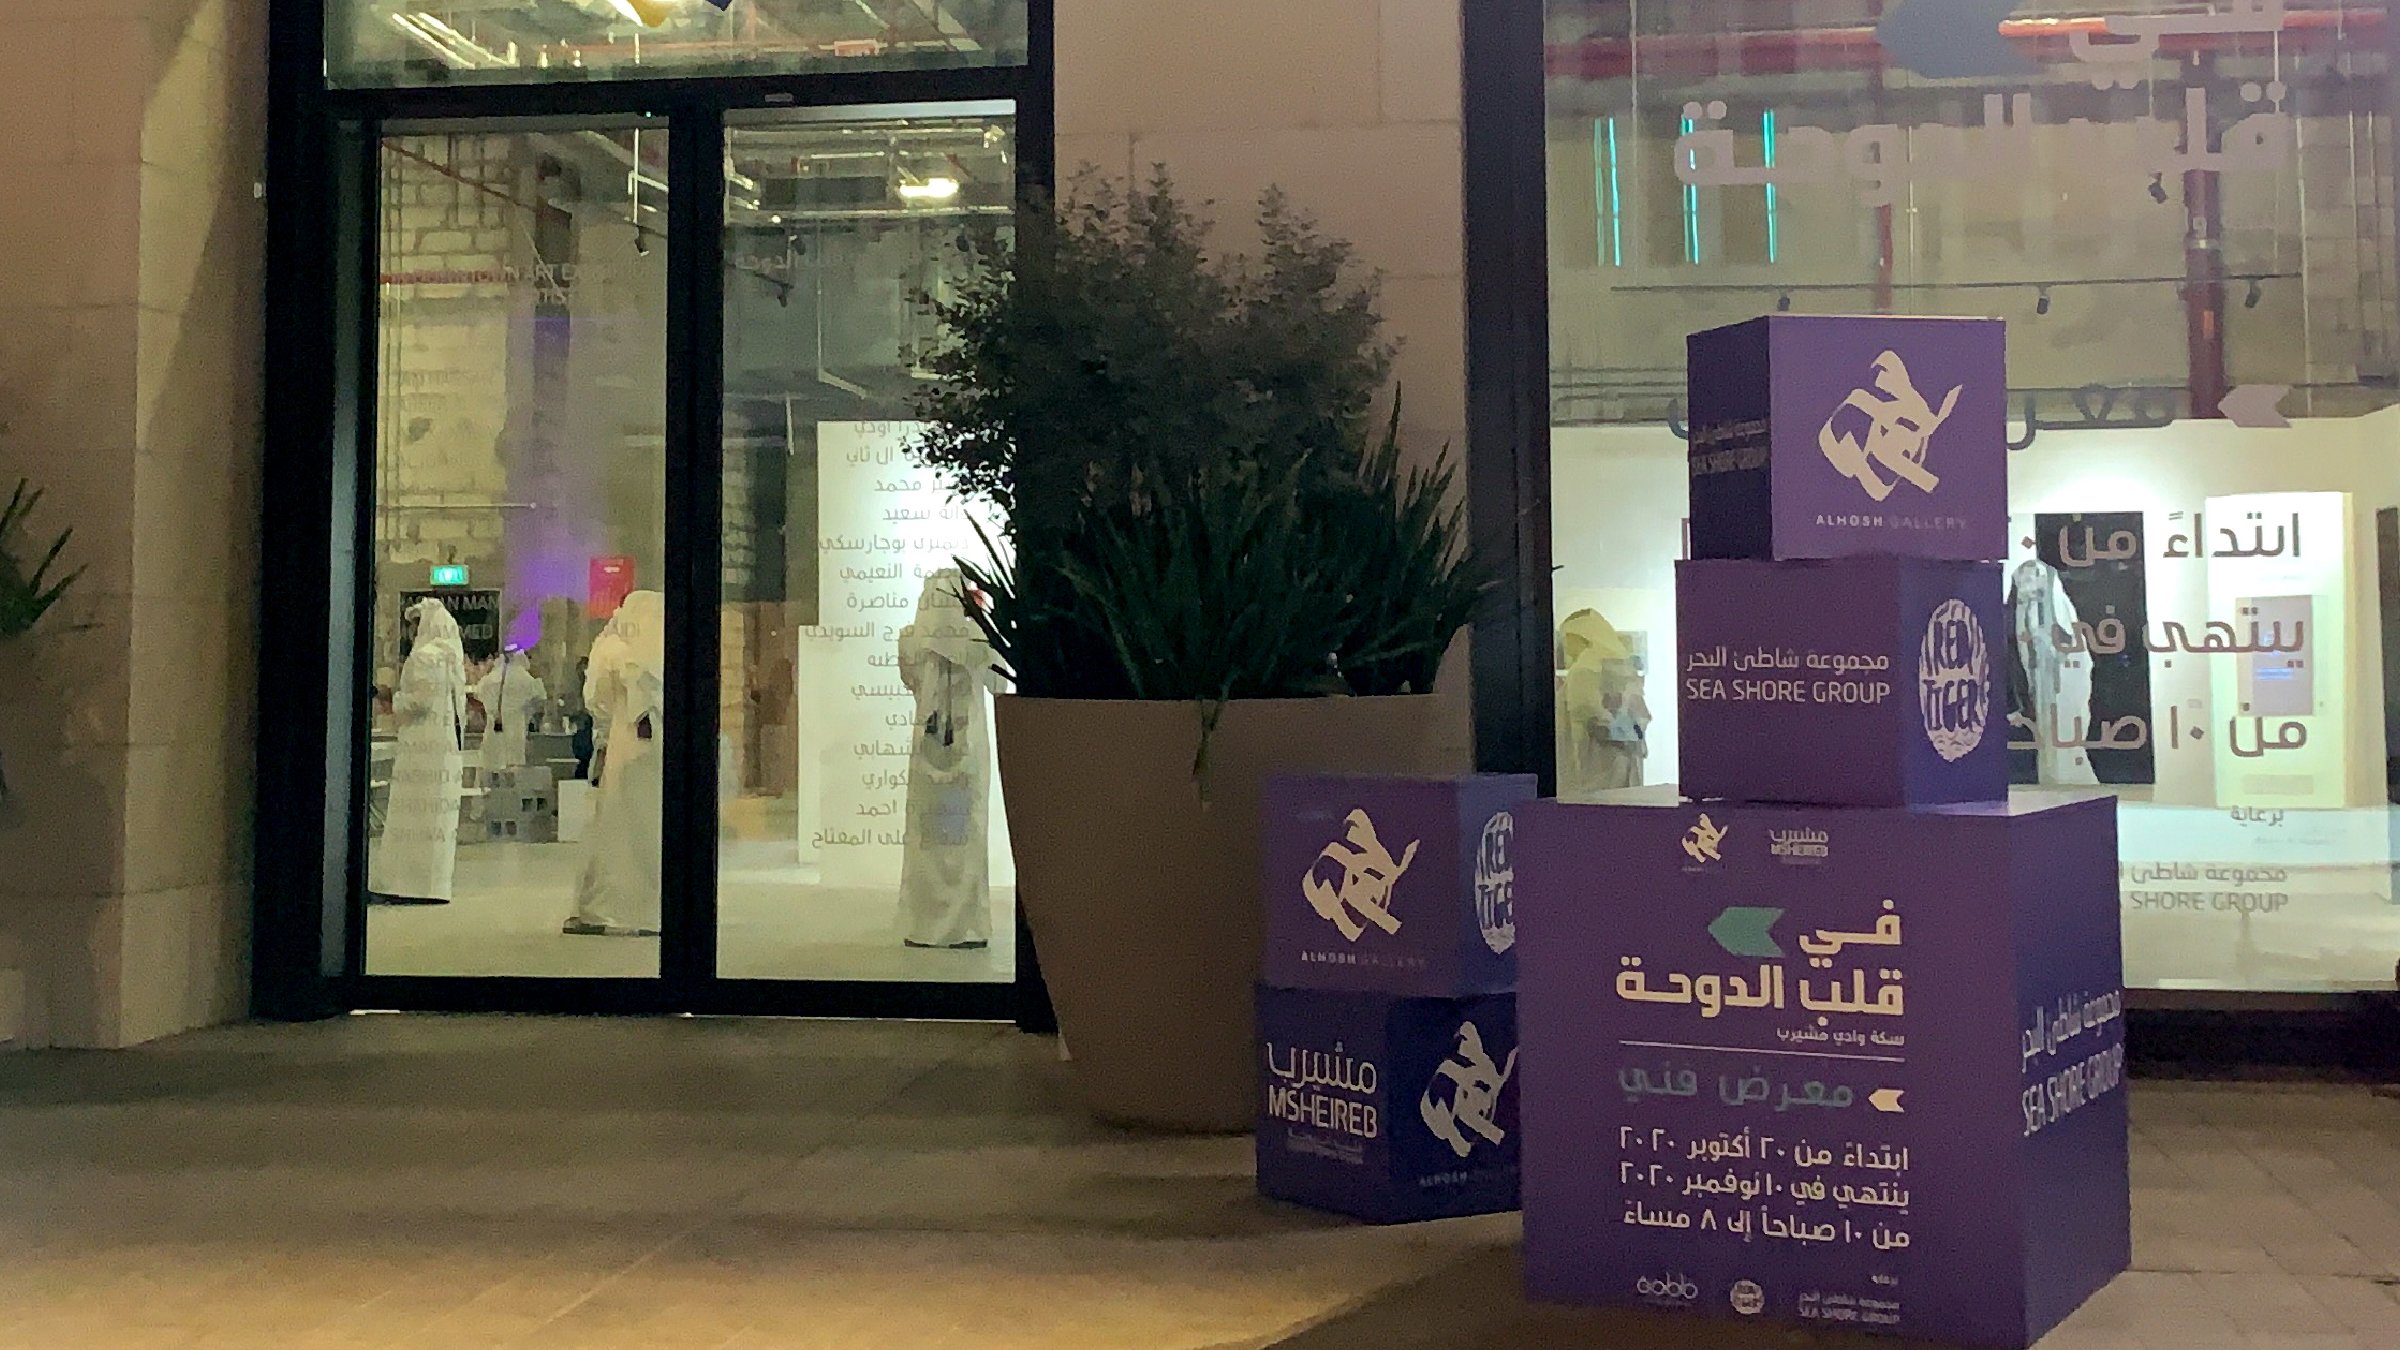 Msheireb Downtown Doha hosts Al Sikka ‘Gourmet Street’ and “In Downtown” exhibition